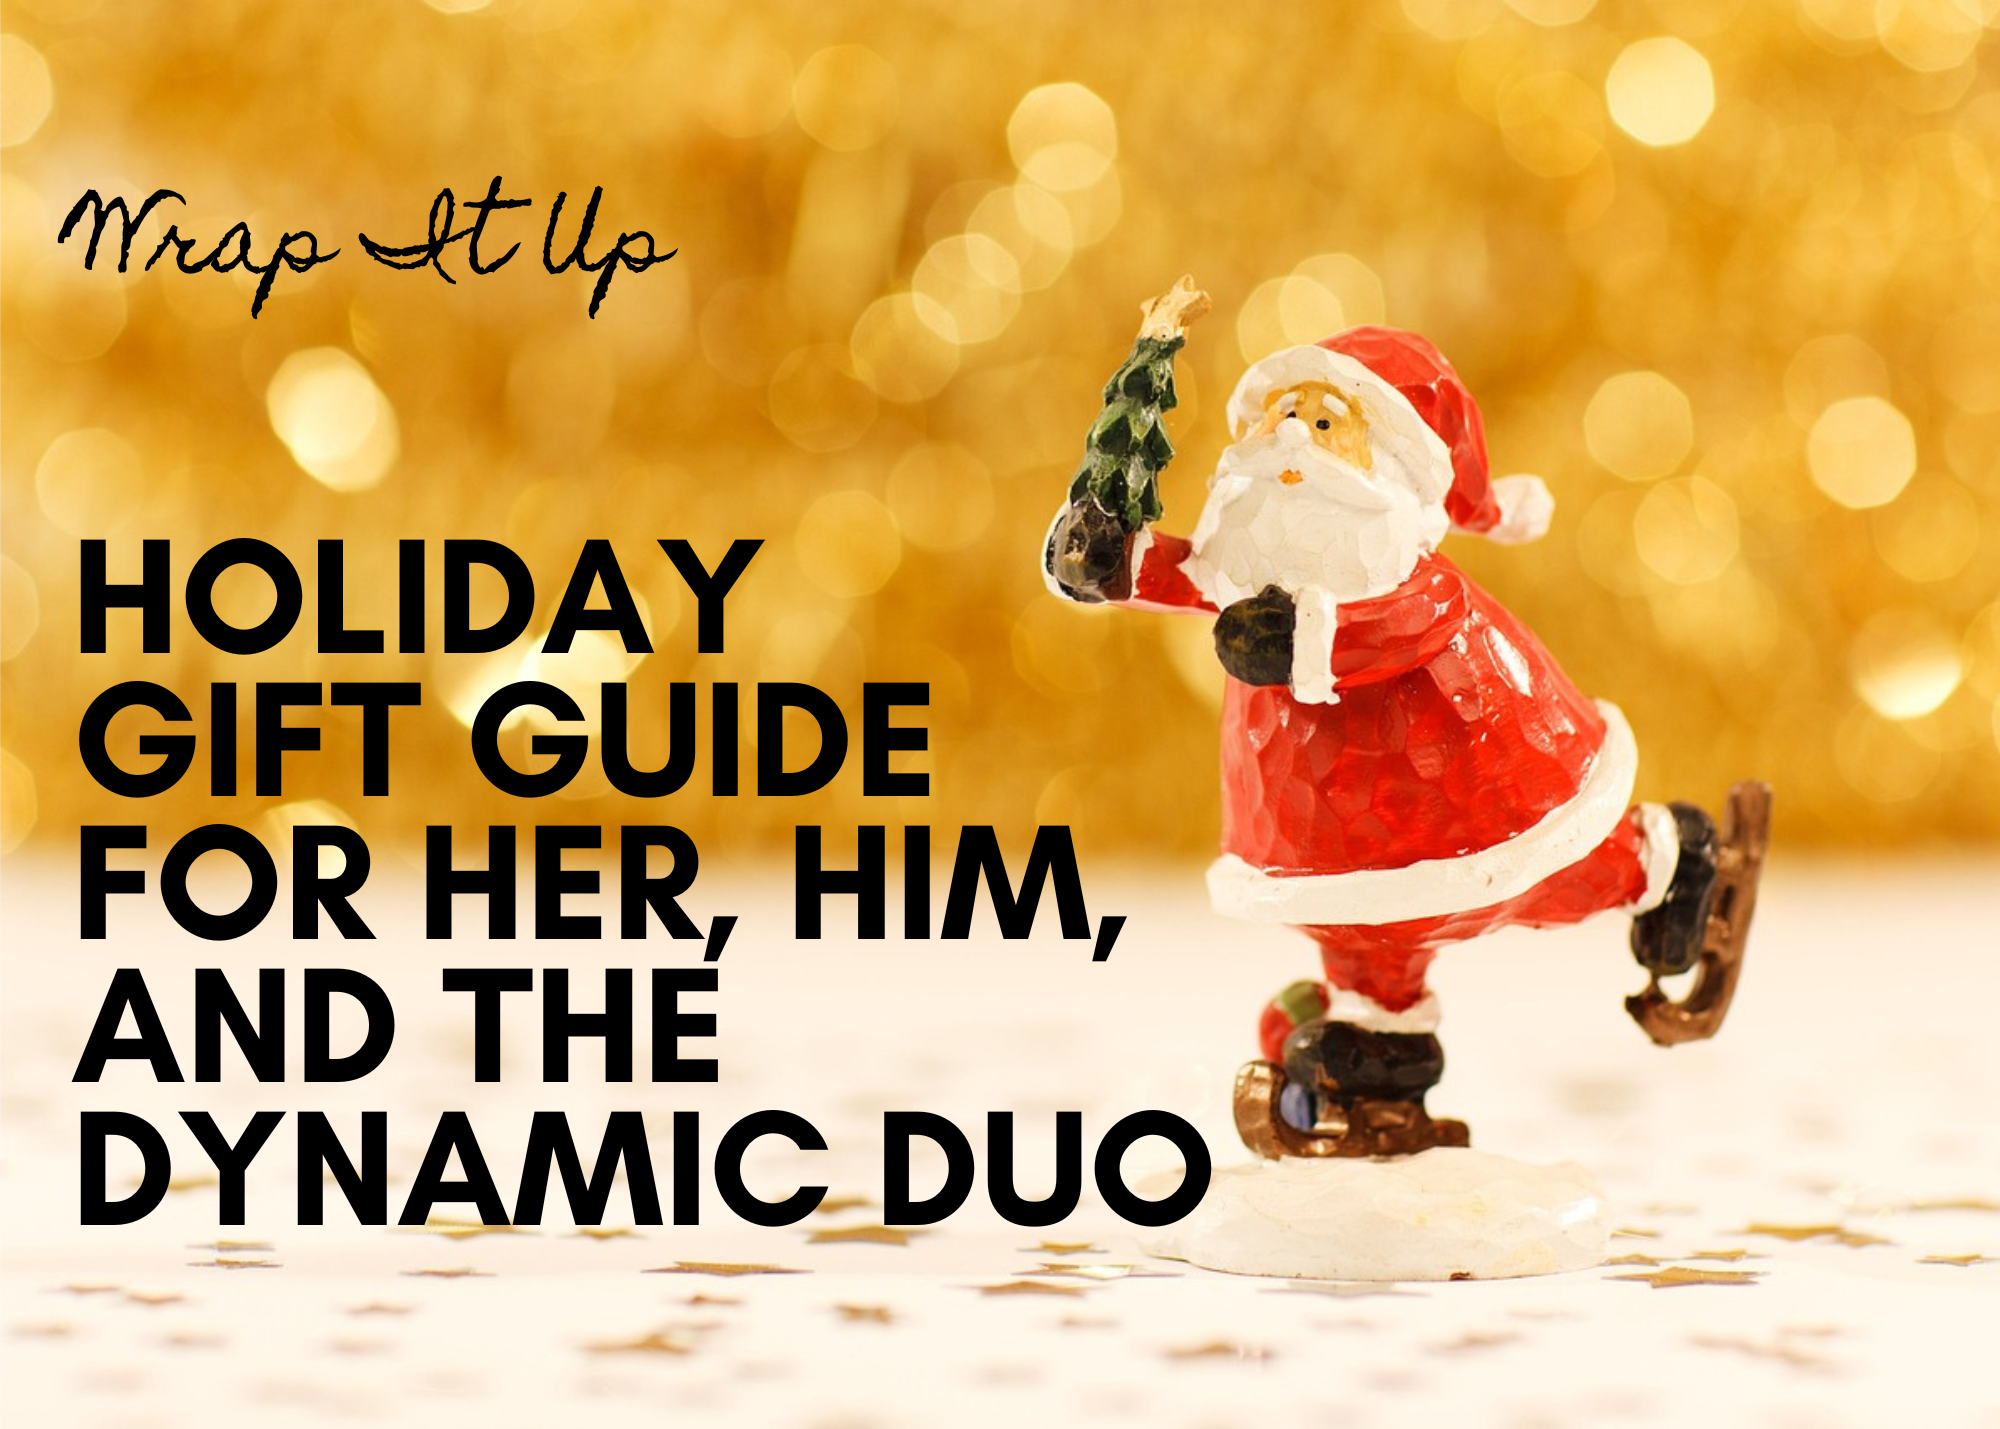 Wrap It Up: Holiday Gift Guide for Her, Him, and the Dynamic Duo